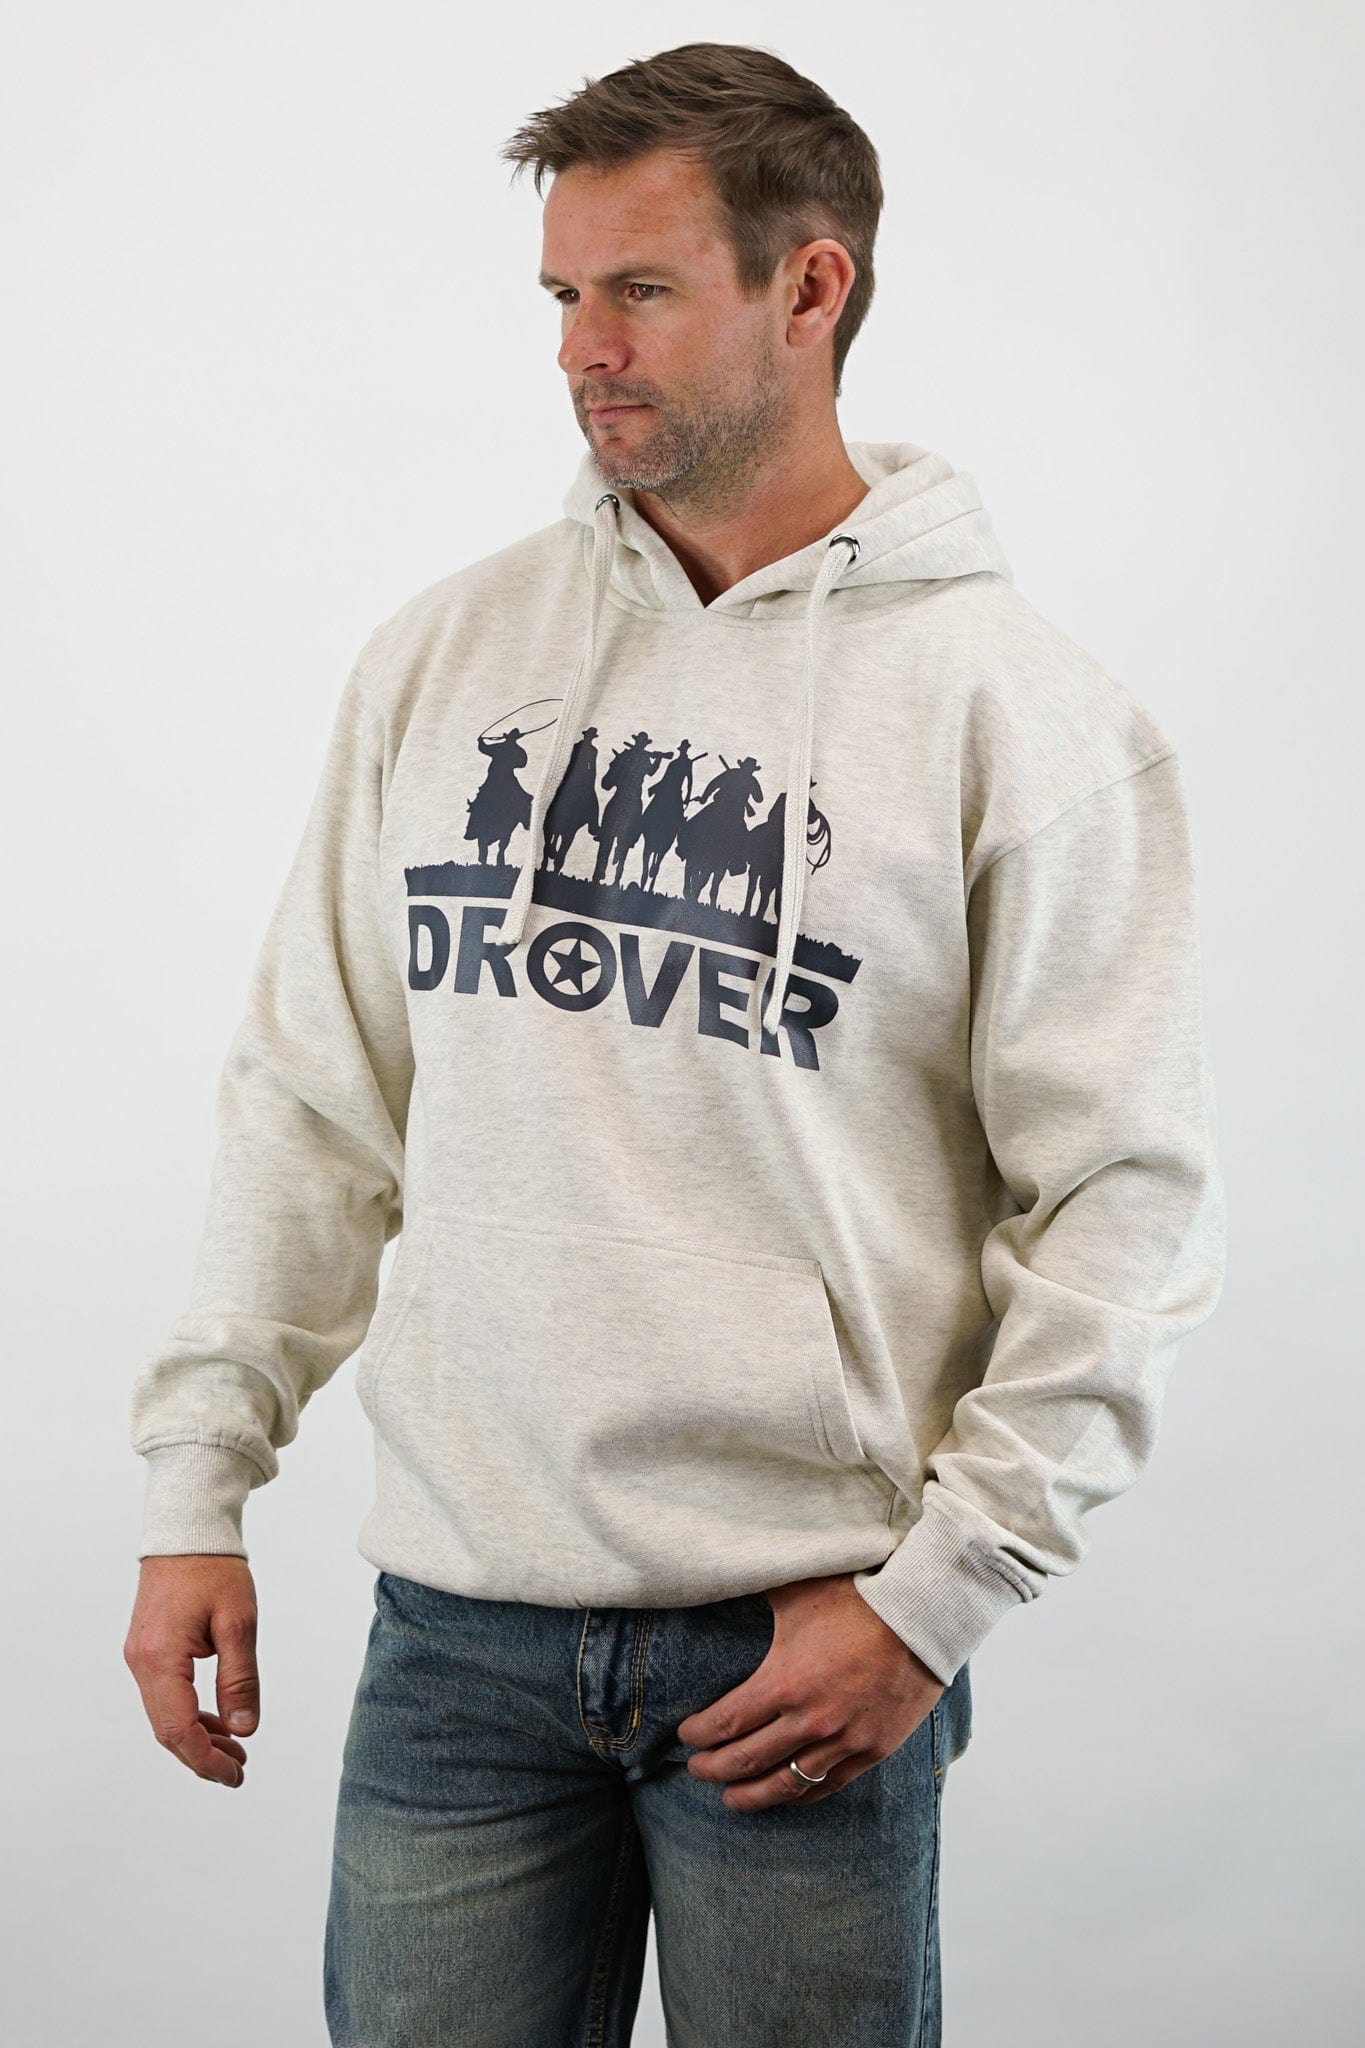 Drover Cowboy Threads Outerwear Hoodie - Riding Cowboys Print, Oatmeal Color